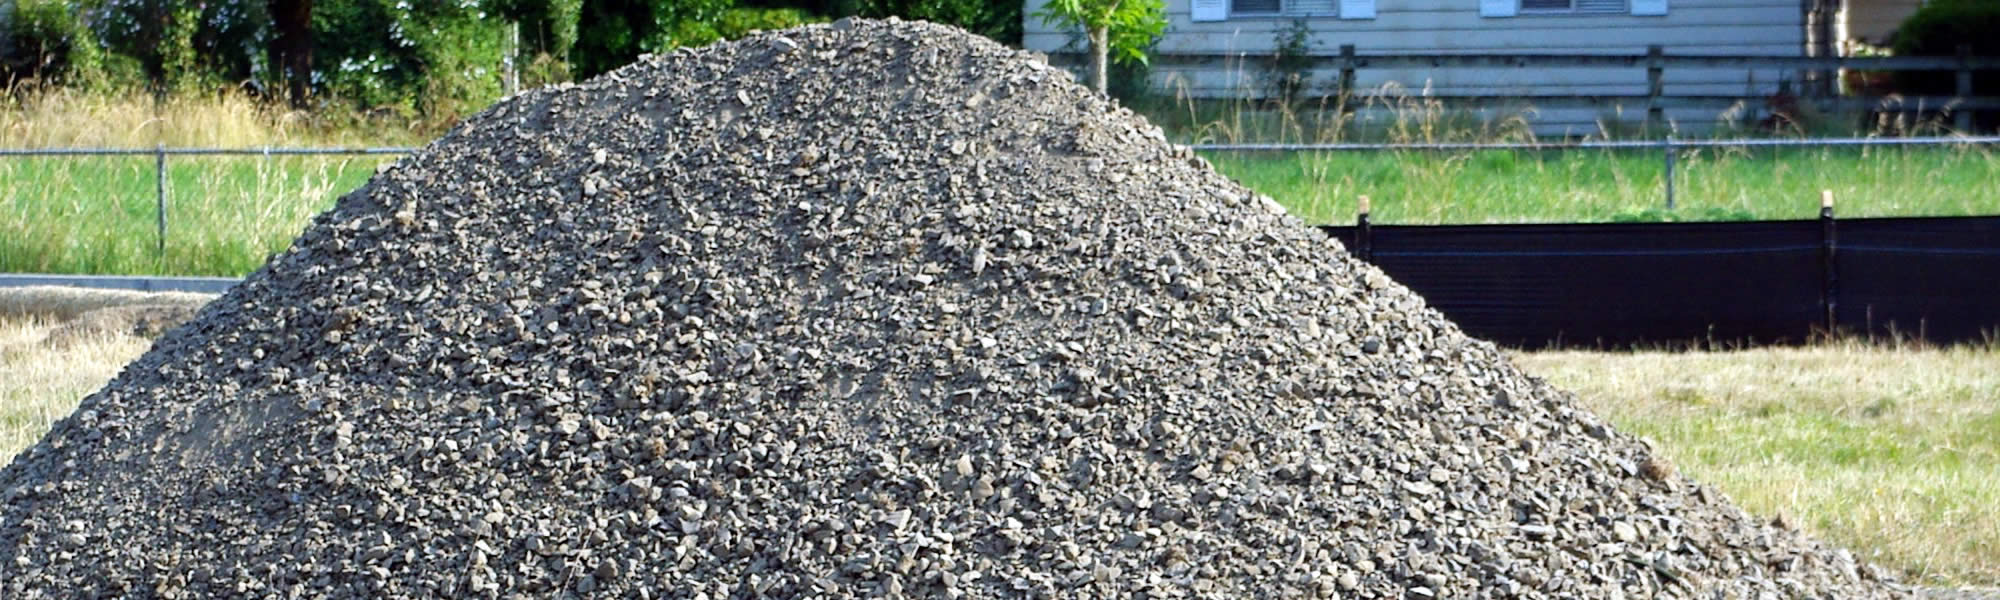 Wrightstown Gravel and Dirt Delivery Services near me